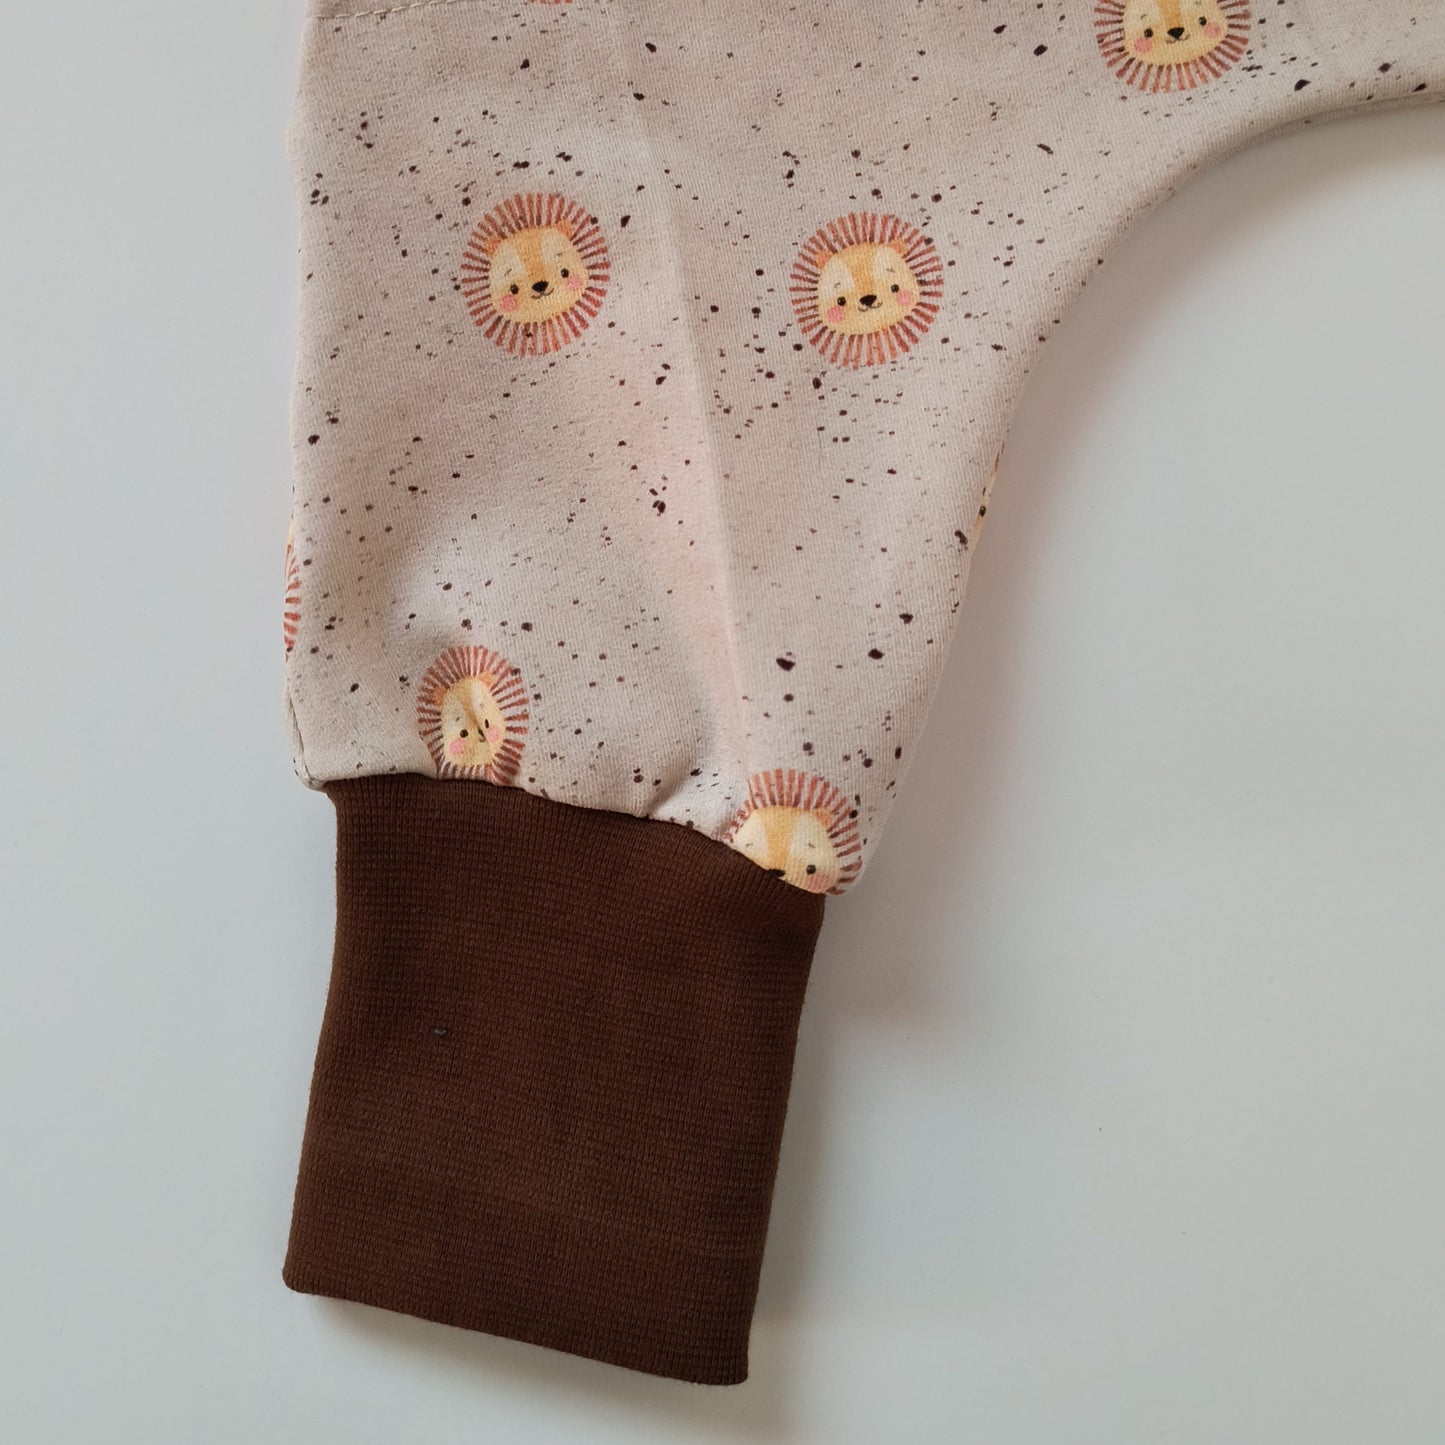 Baby sweat pants "grow with me", leo print, size EUR 80-86 cm / US 10-18 months (Handmade in Canada)